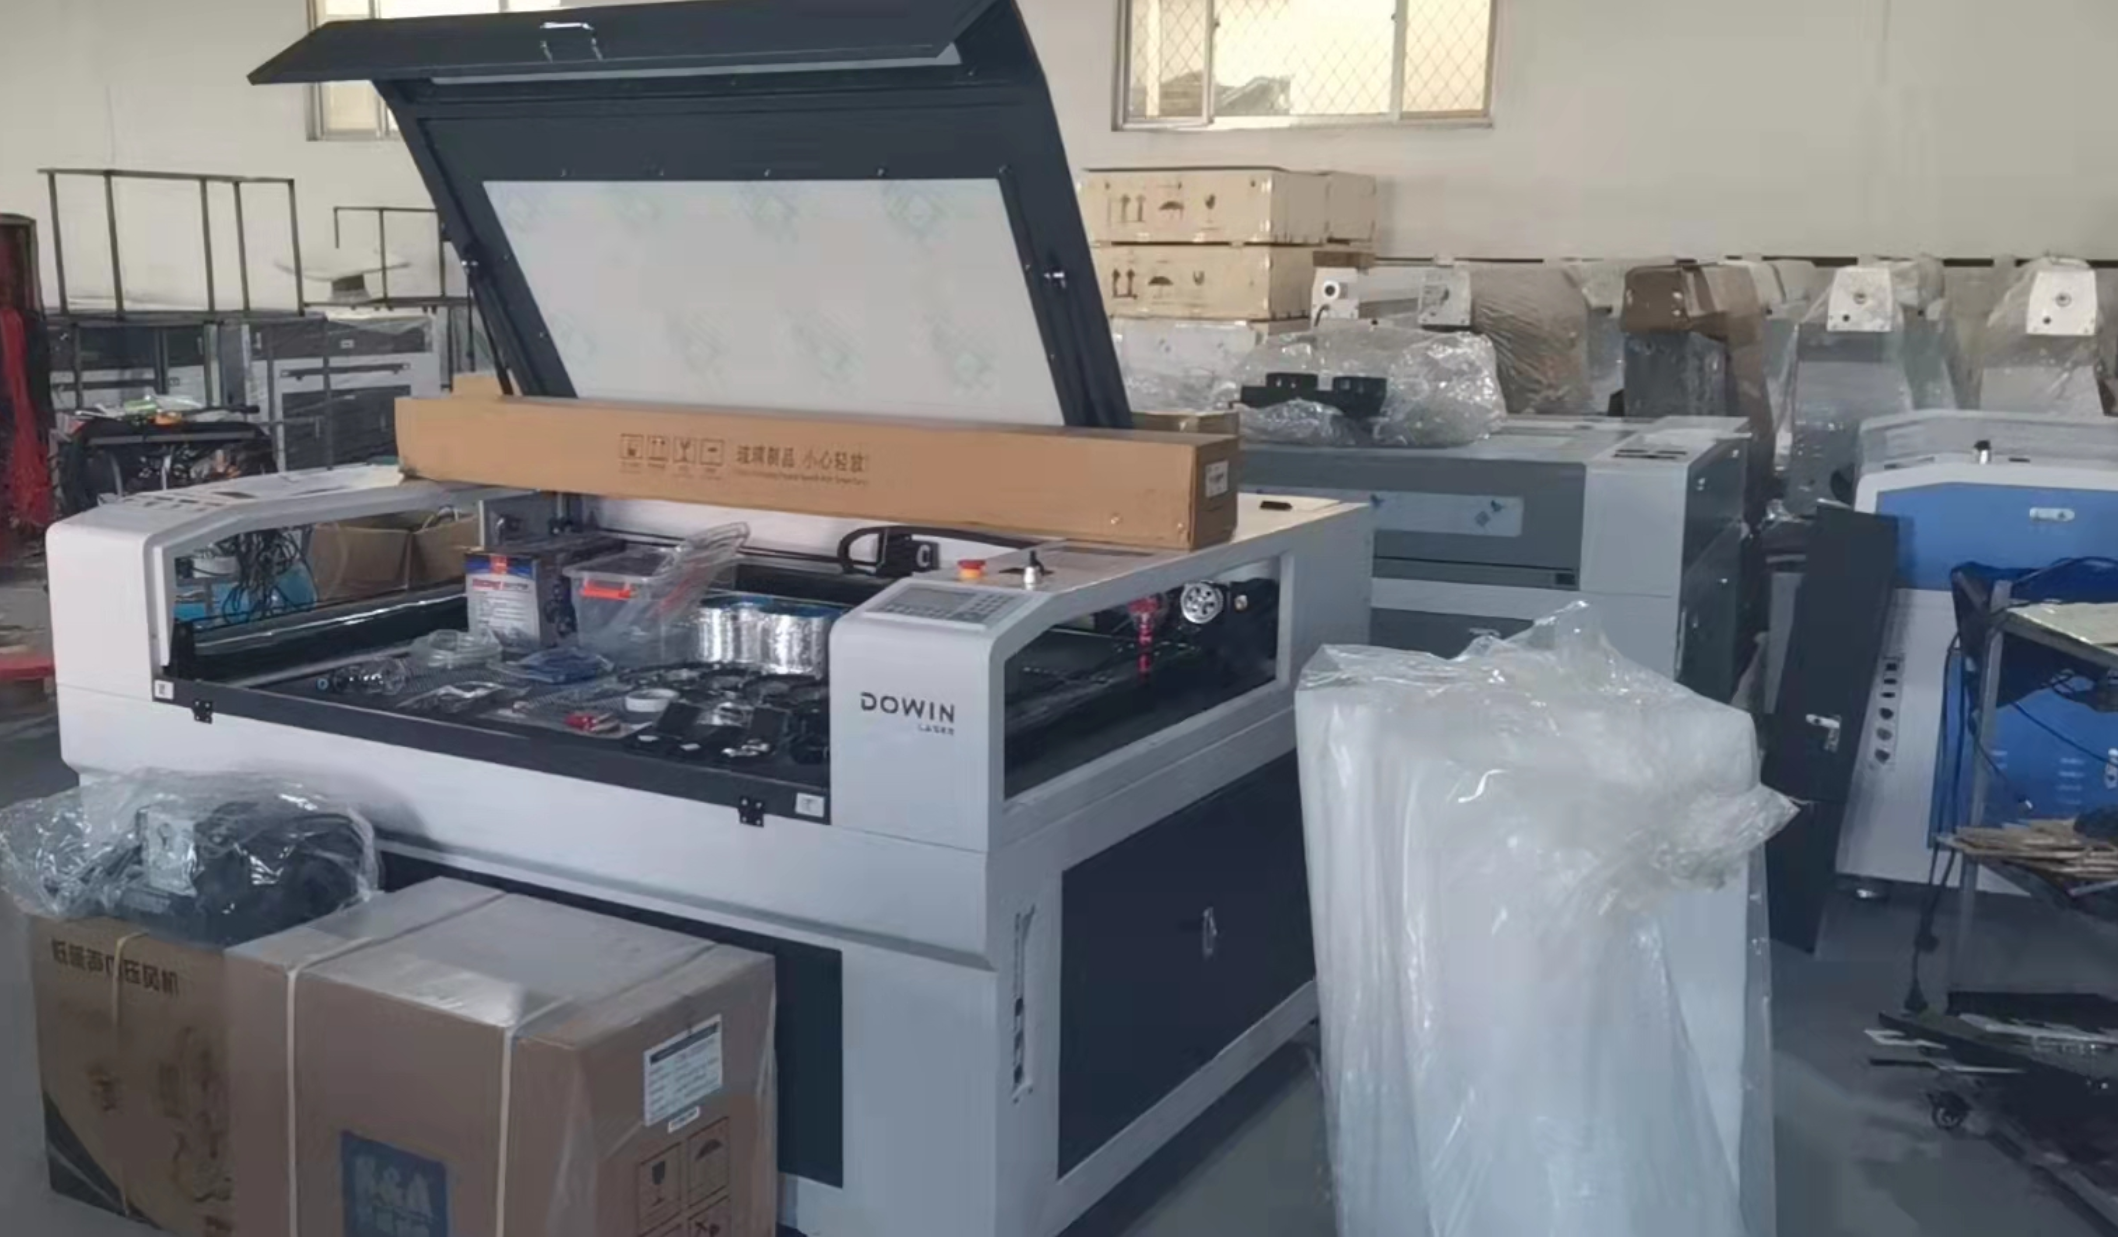 Dowin 1390 Co2 laser cutting machine with Electrical moving table